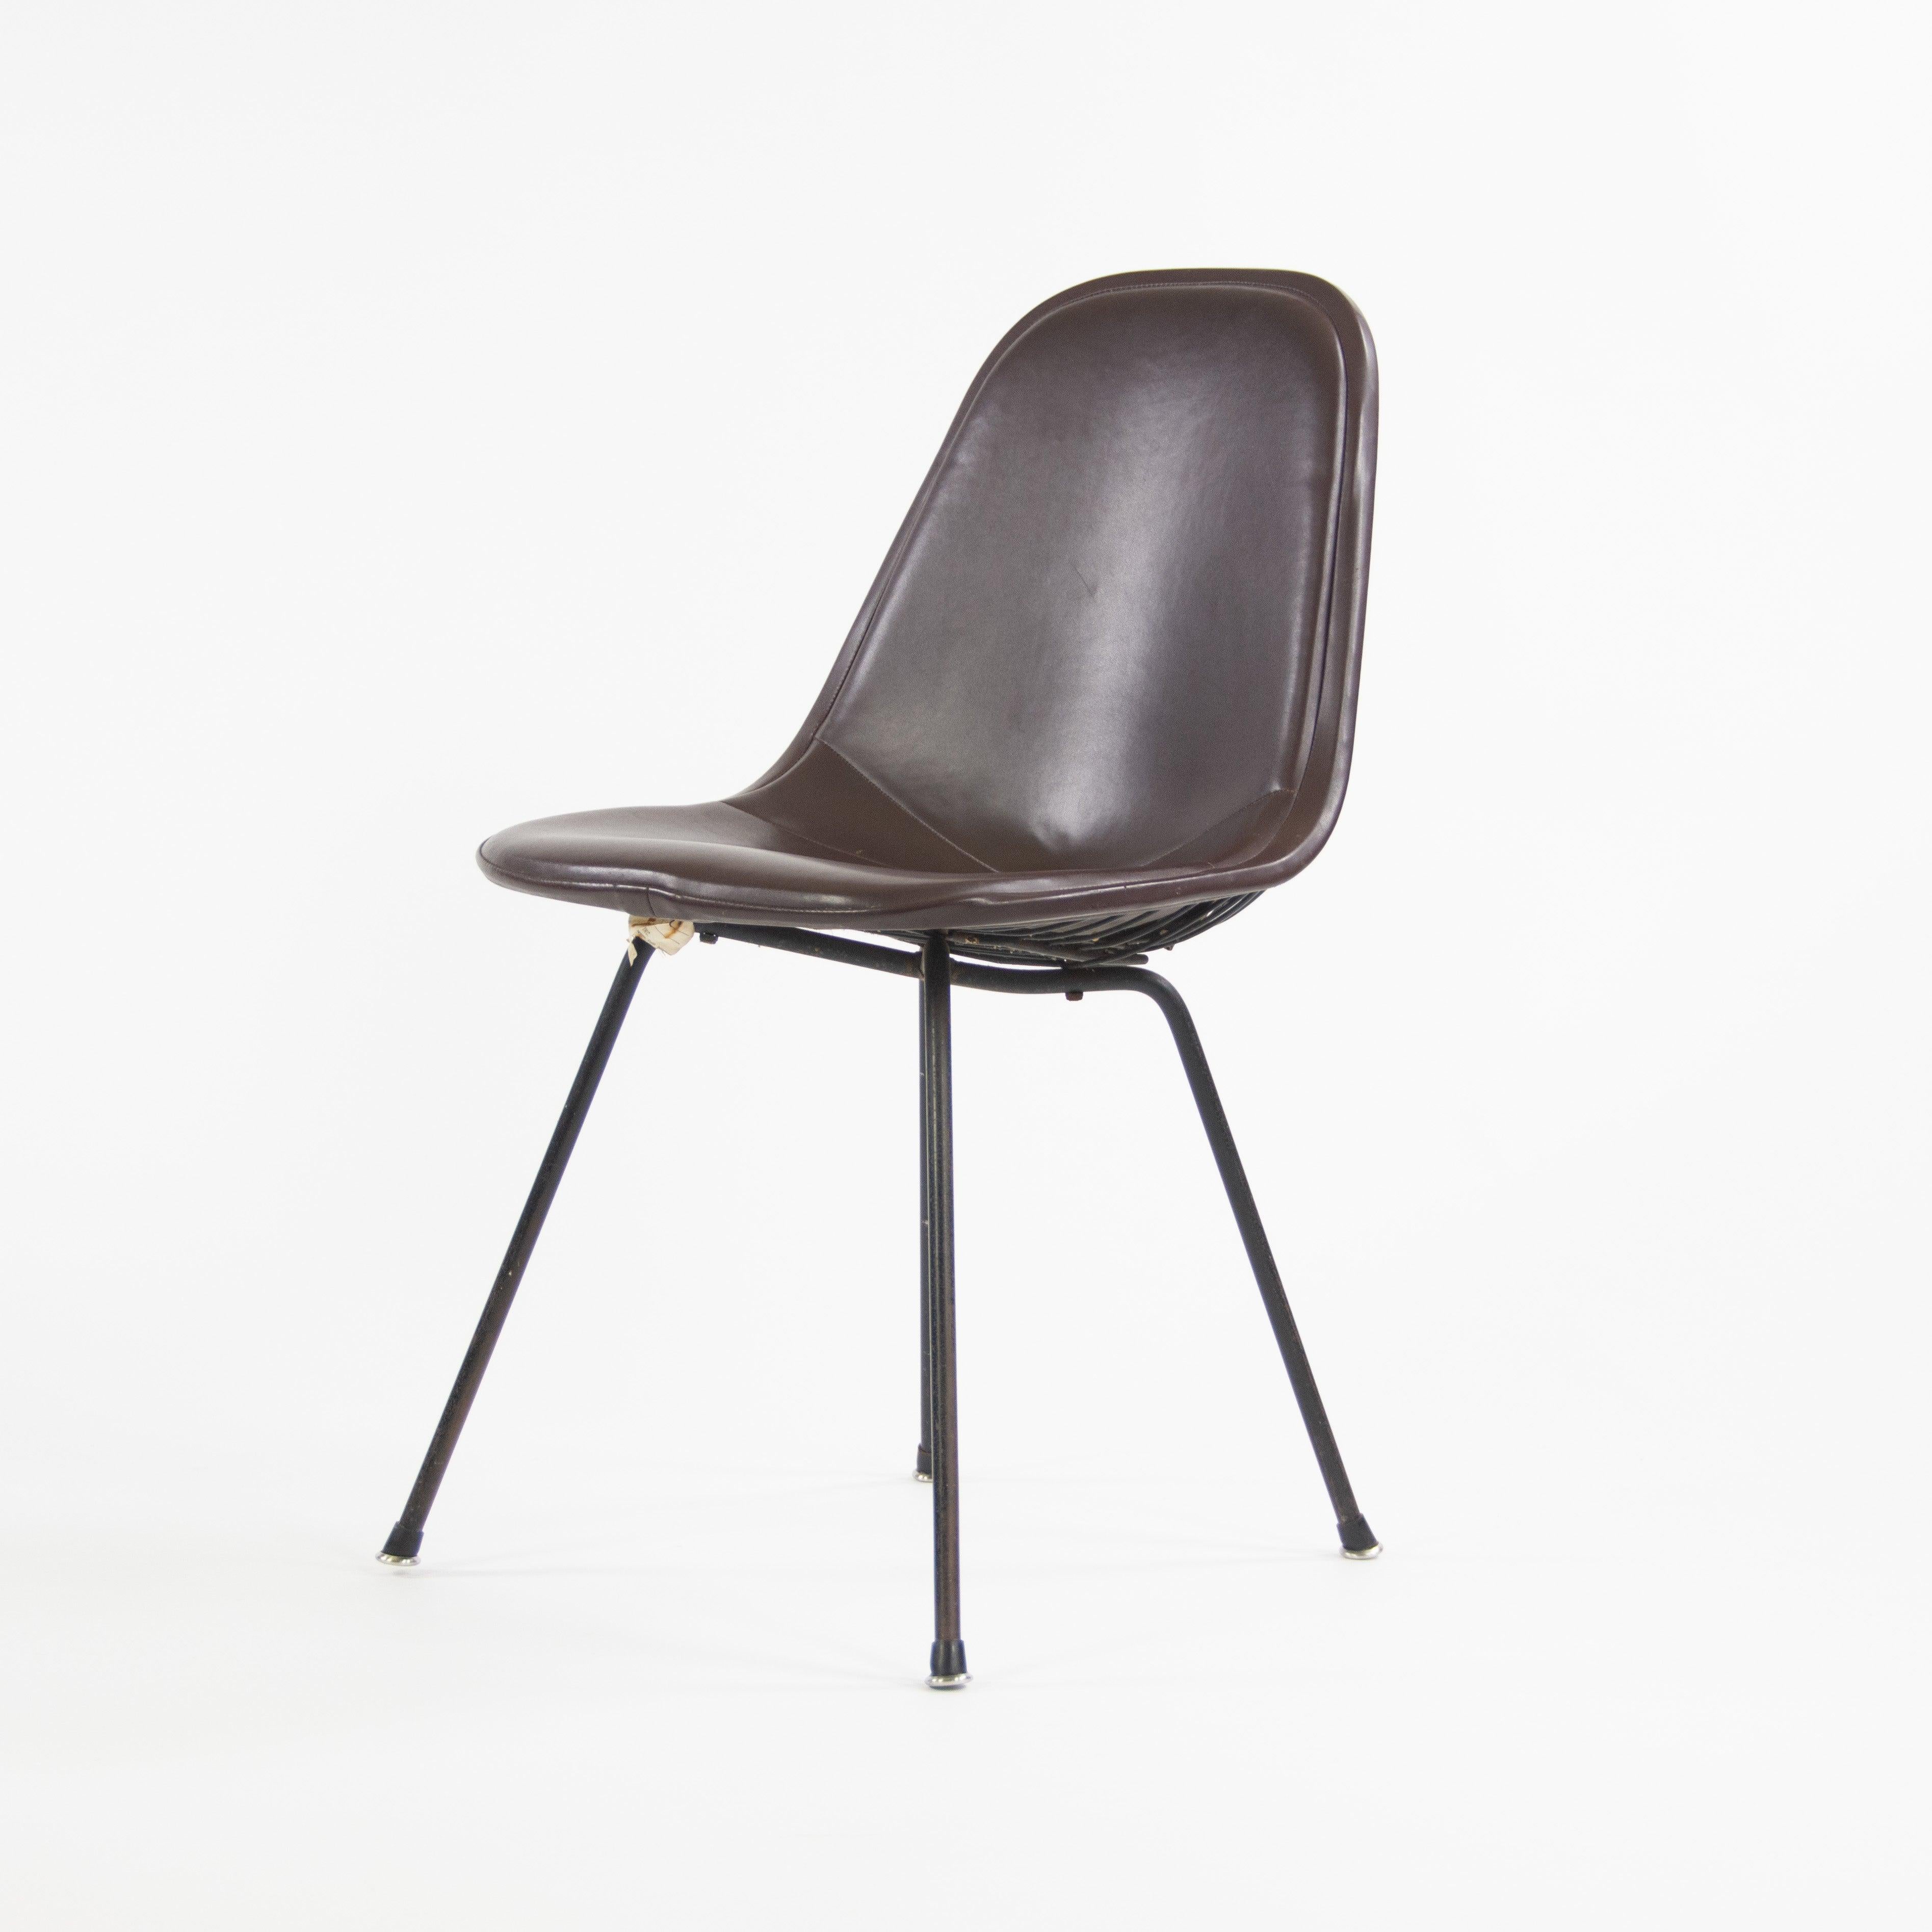 Listed for sale is a super rare and original Eames for Herman Miller 1954 DKX chair with wire top, upholstered pad, and early X base.

This piece can be dated due to the use of this base typology, as the X base was only used during the earlier